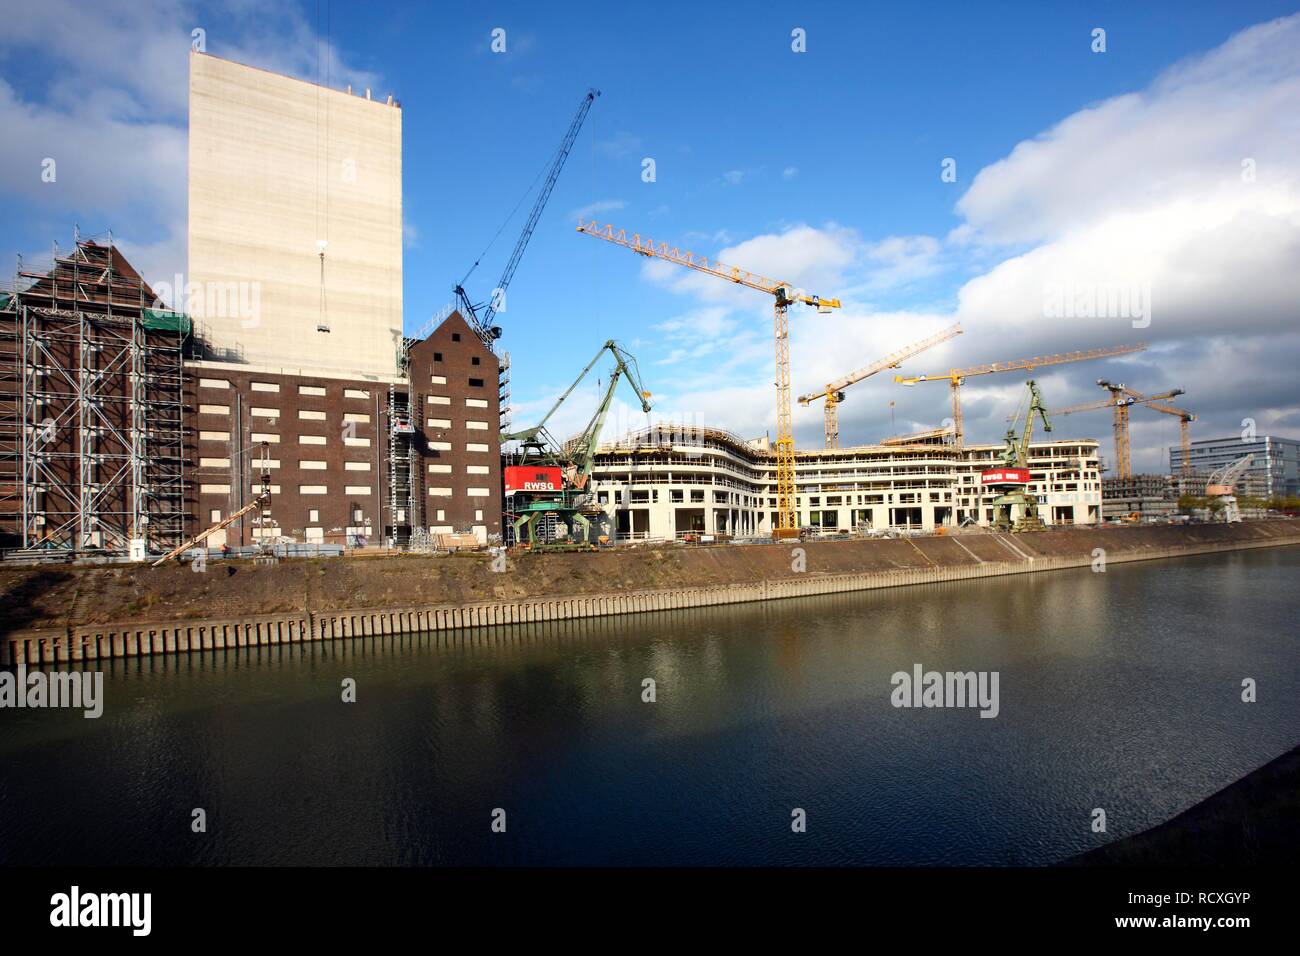 Major construction site, Landesarchiv NRW, North Rhine-Westphalia State Archive, Germany's largest archive building Stock Photo